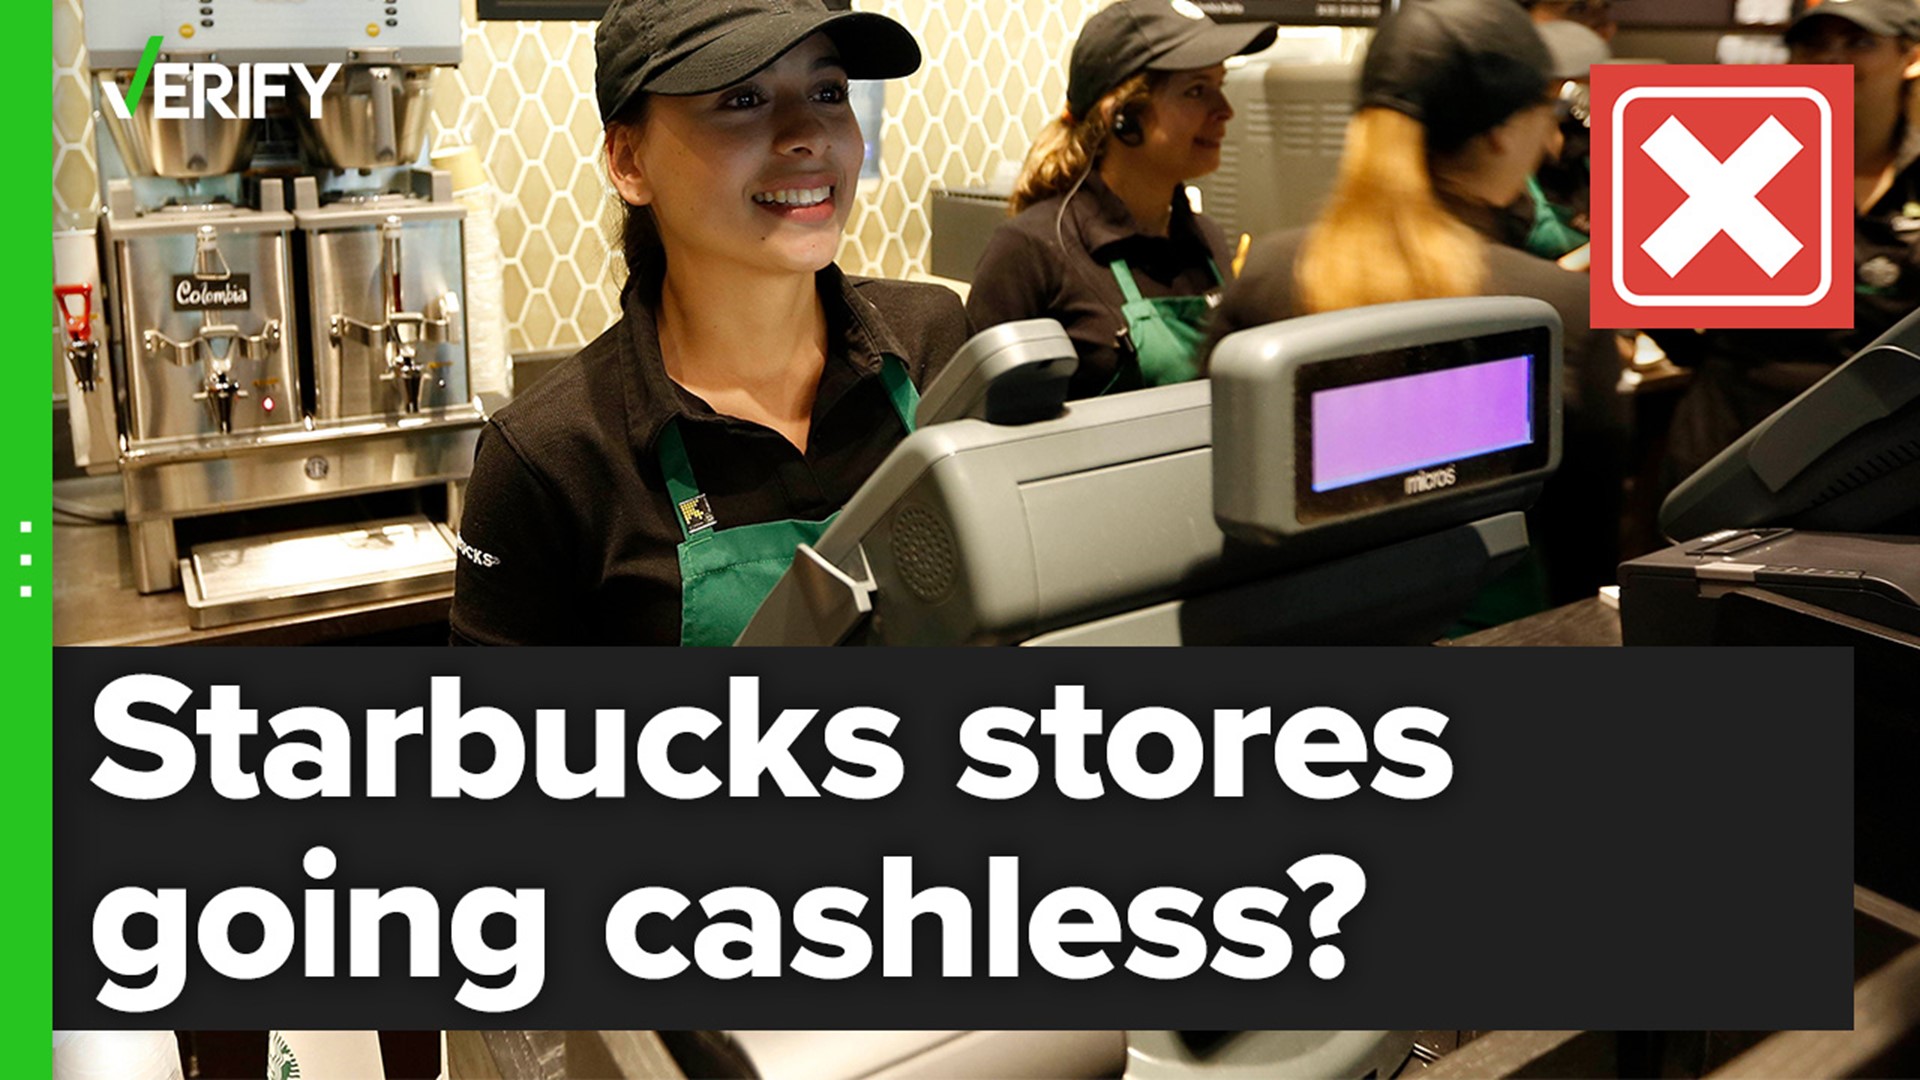 Starbucks accepts multiple forms of payments, including cashless options. The chain is not going cashless, as some people online suggest.